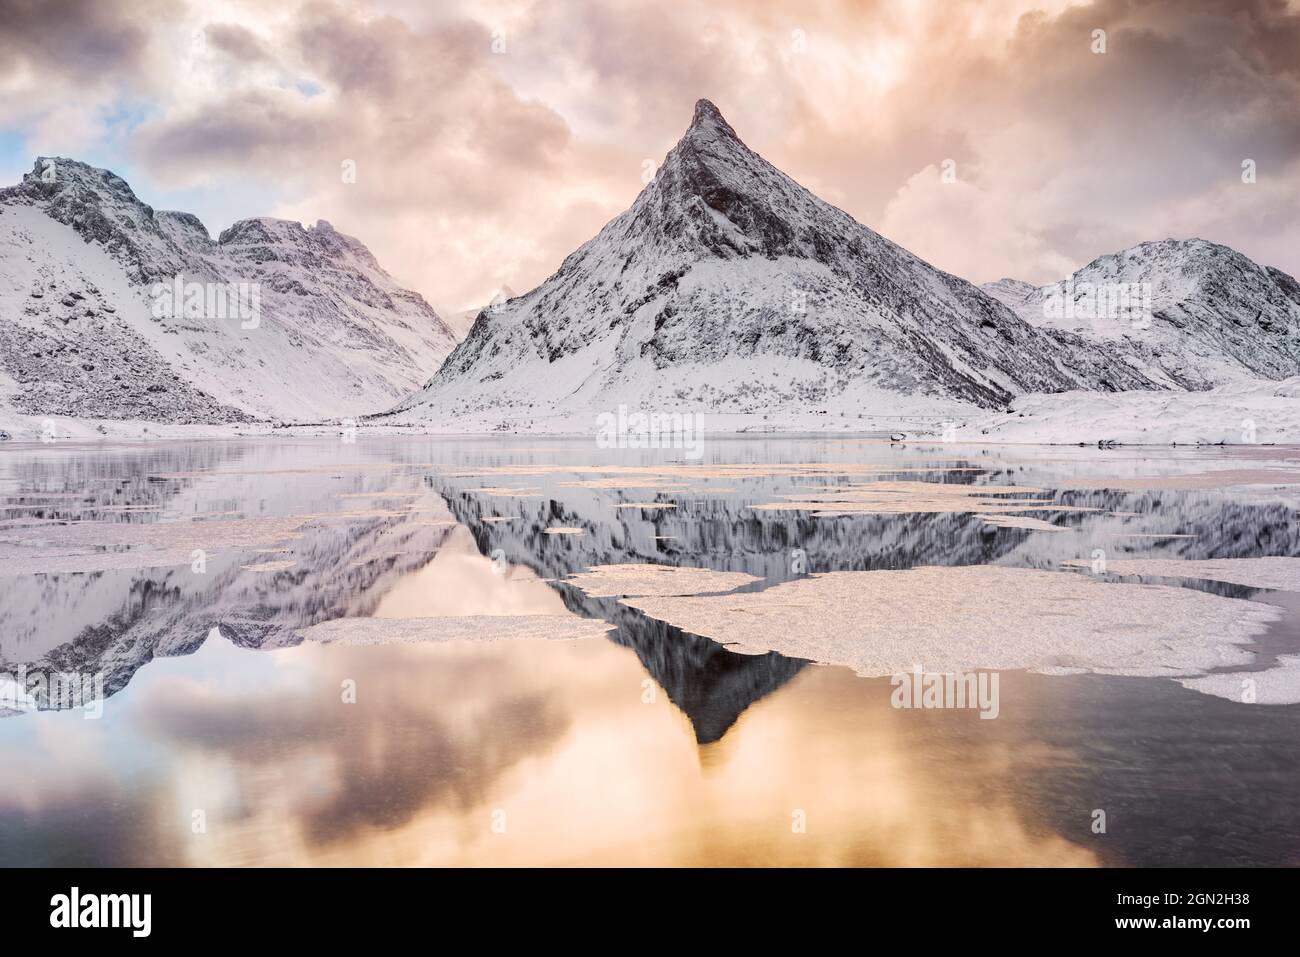 NORWAY, LOFOTEN ISLANDS, FREDVANG. VIEW OF THE SHARP SNOWY MOUNTAIN AT FREDVANG WITH ITS REFLECTION AT SUNRISE Stock Photo